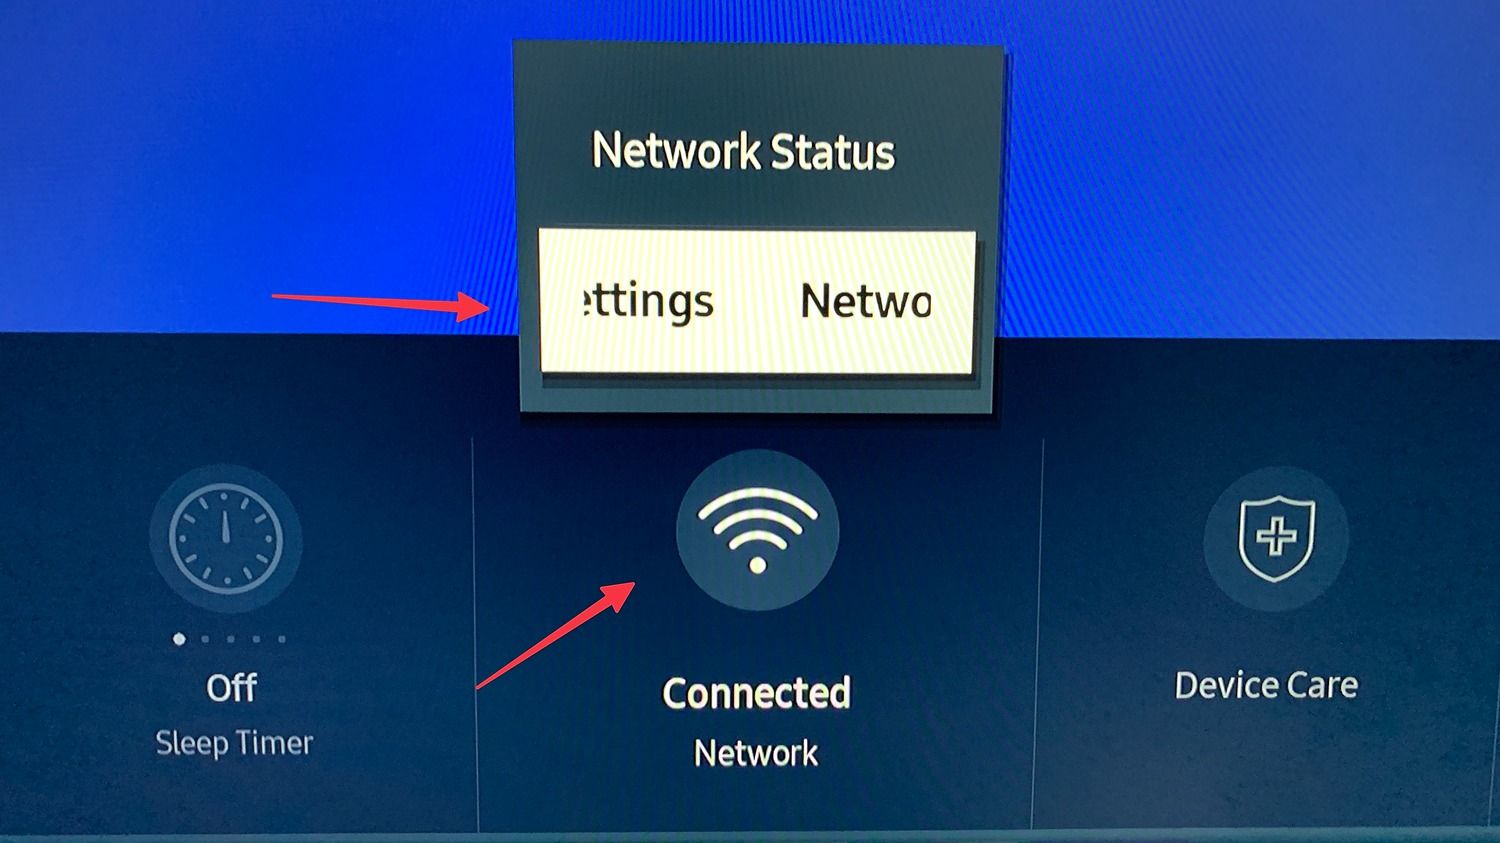 Samsung TV Network settings screen showing Wi-Fi connection status